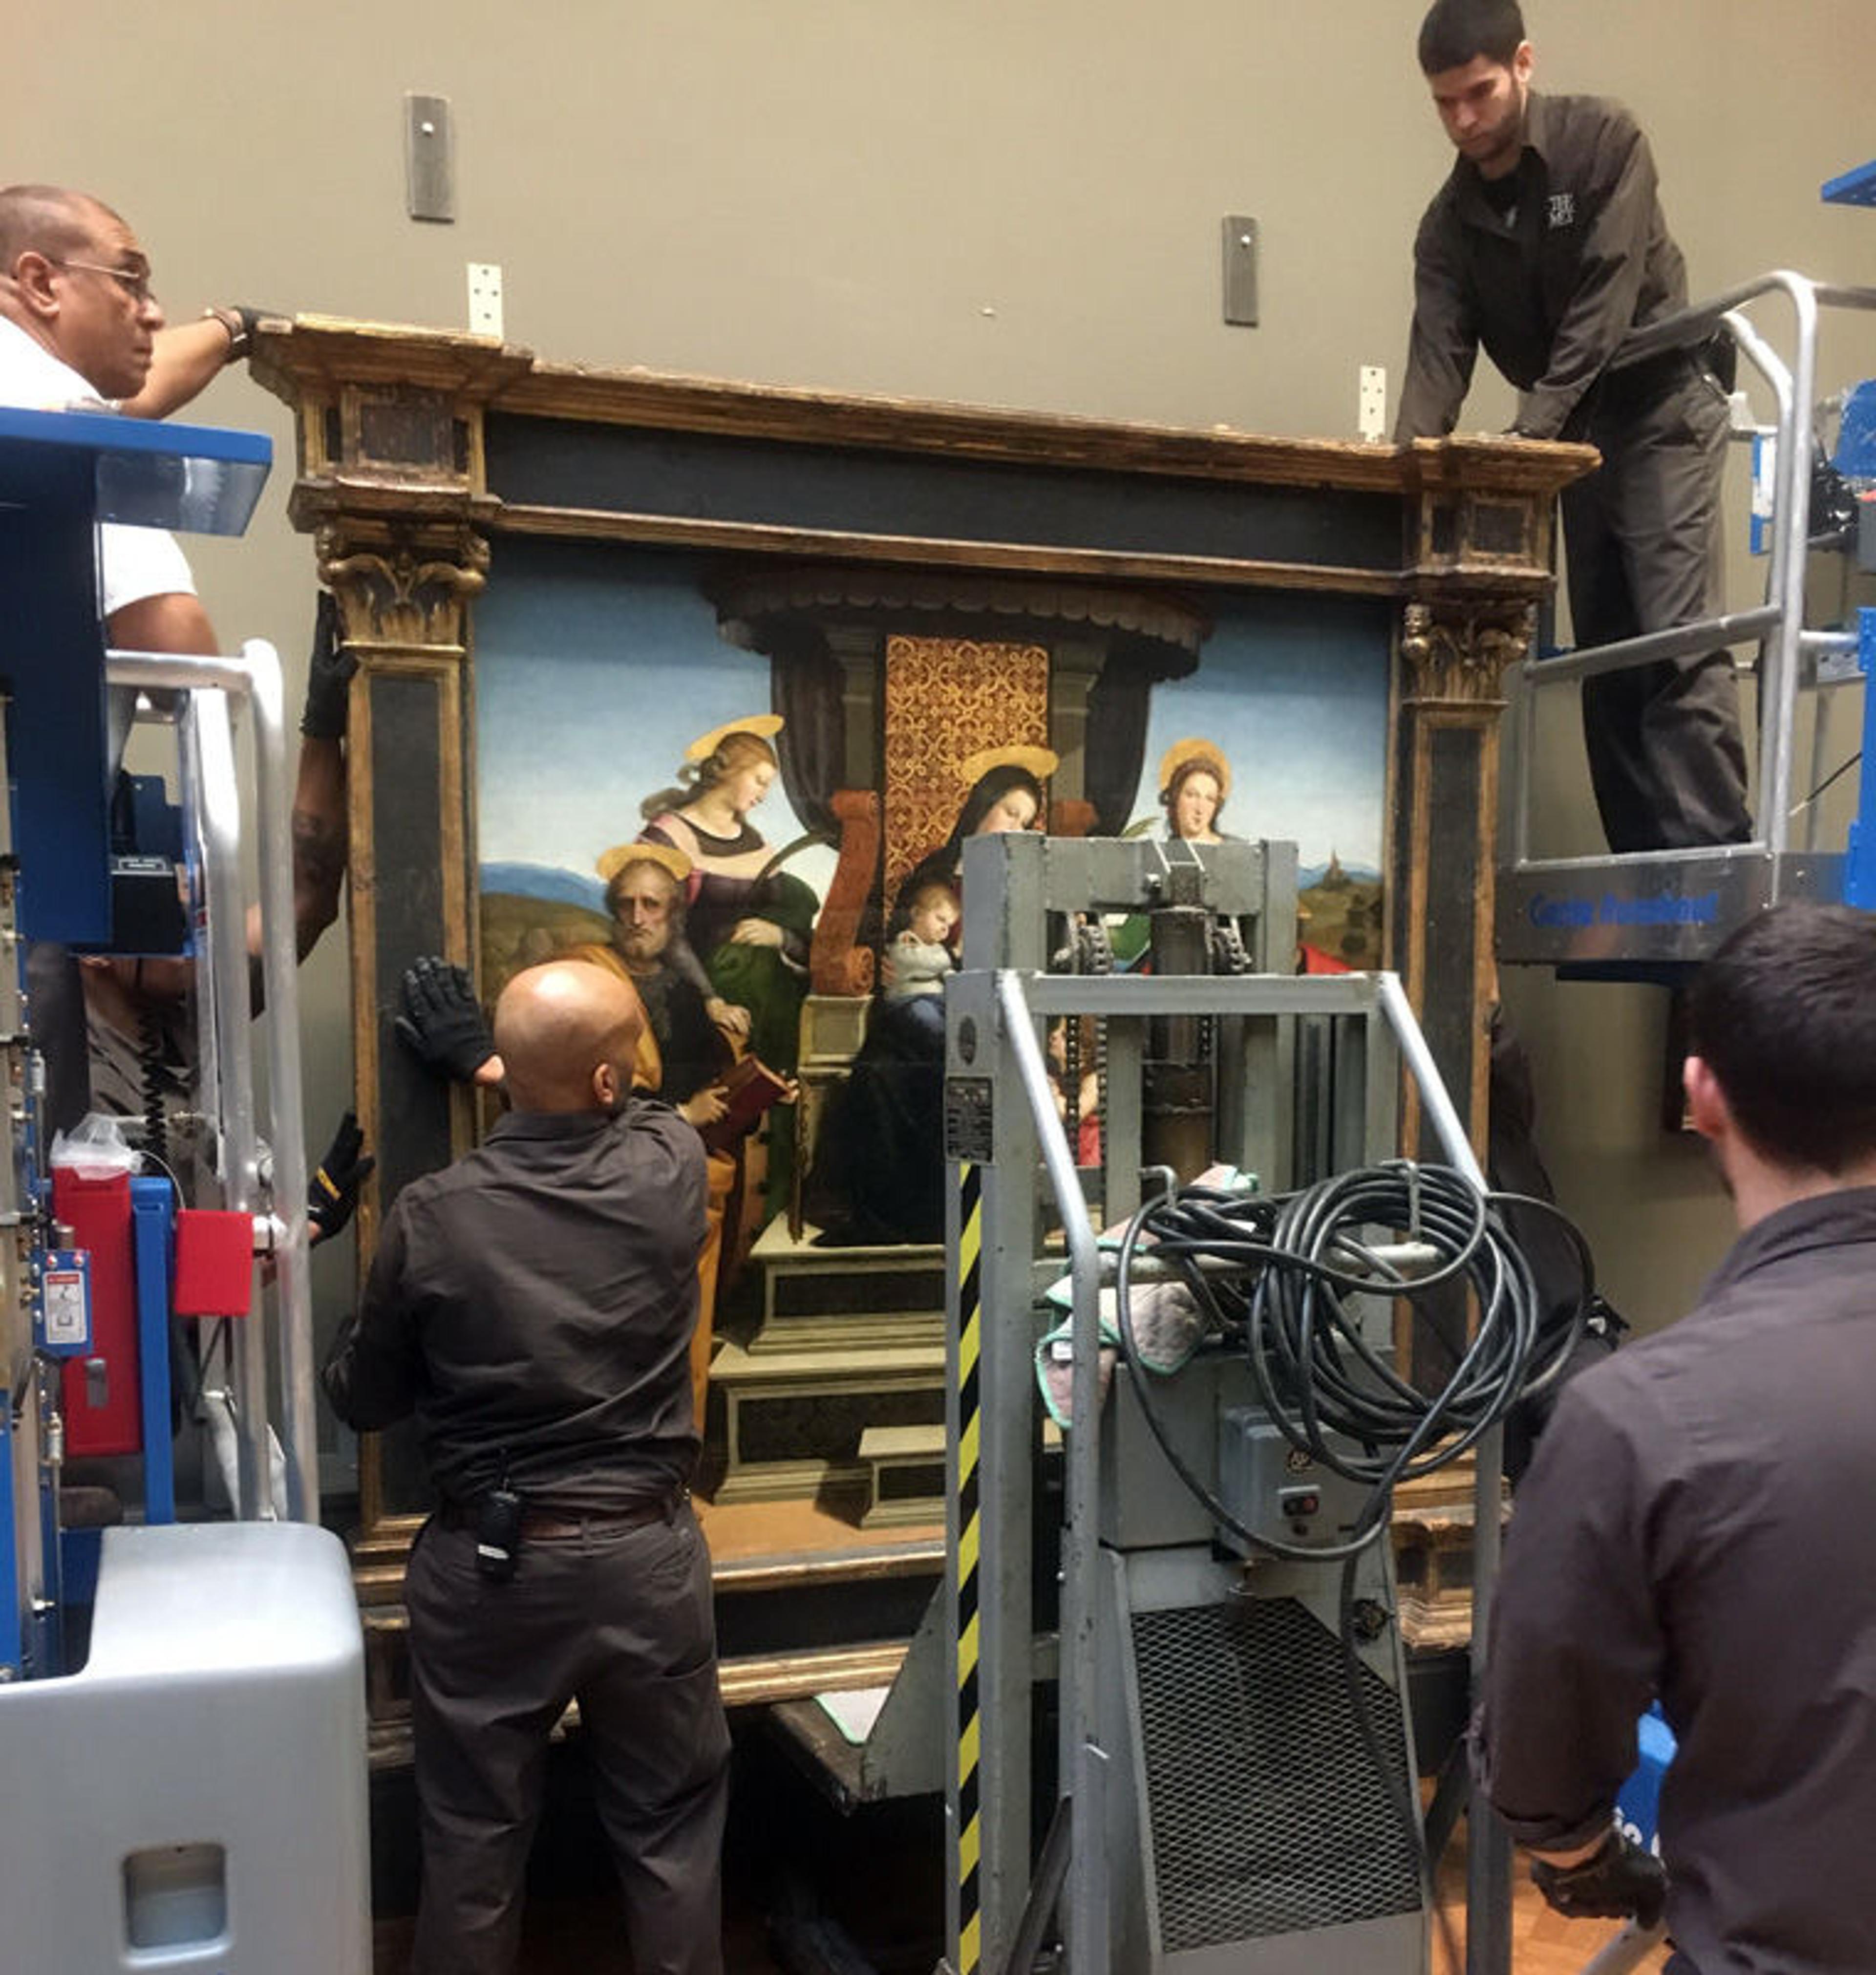 Museum staff secure an altarpiece by Raphael onto a rig